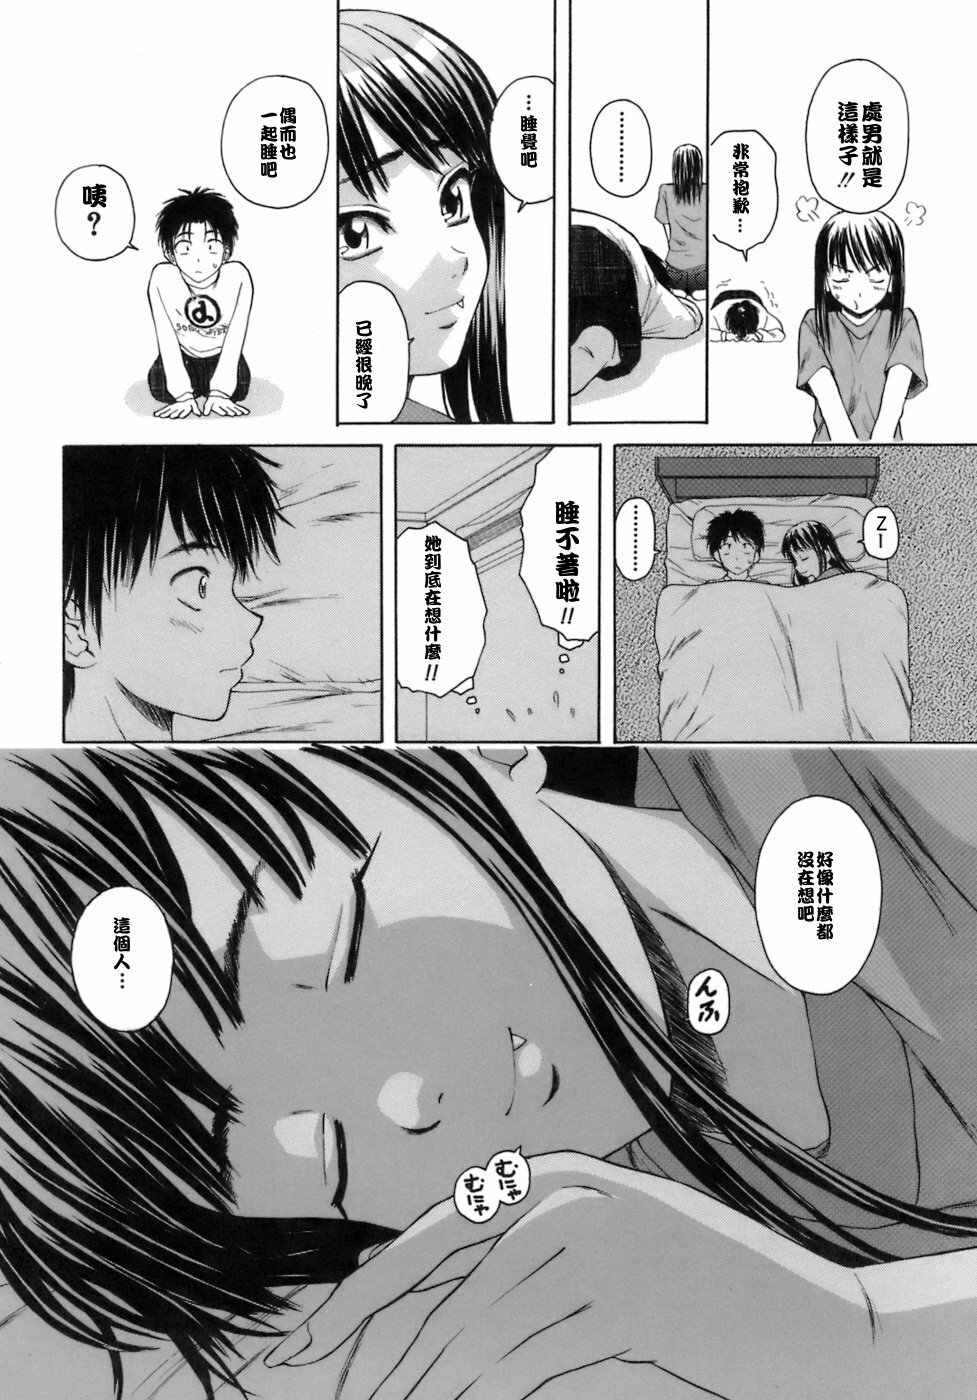 [Fuuga] Kyoushi to Seito to - Teacher and Student [Chinese] [悠月工房] page 39 full